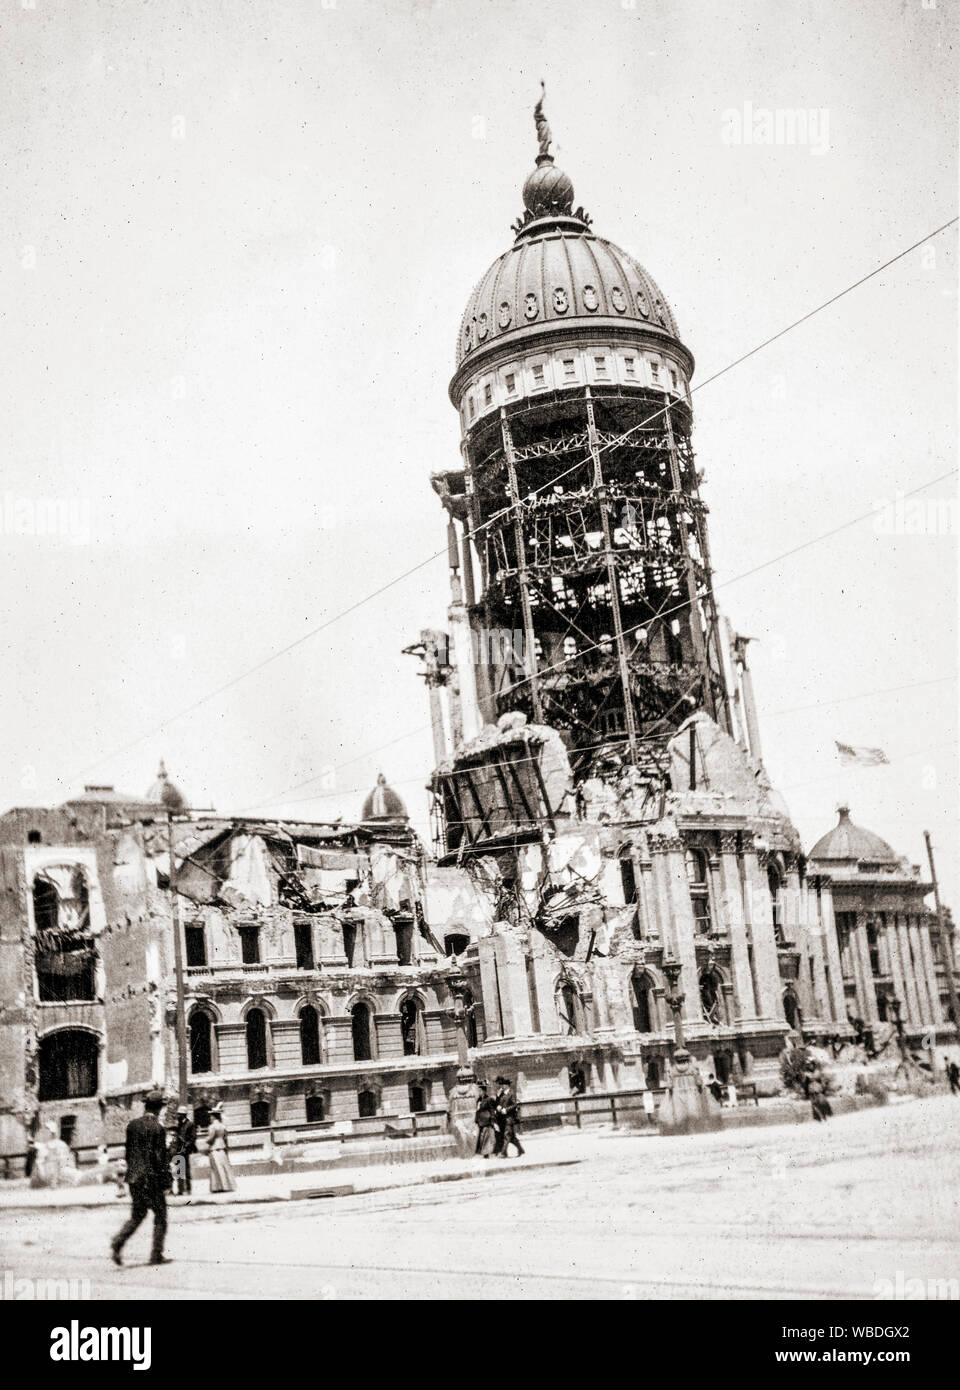 San Francisco City Hall after the earthquake of  April 18, 1906.  San Francisco, California, United States of America.  After a photogaph by Dolph Kessler, 1884-1945. Stock Photo